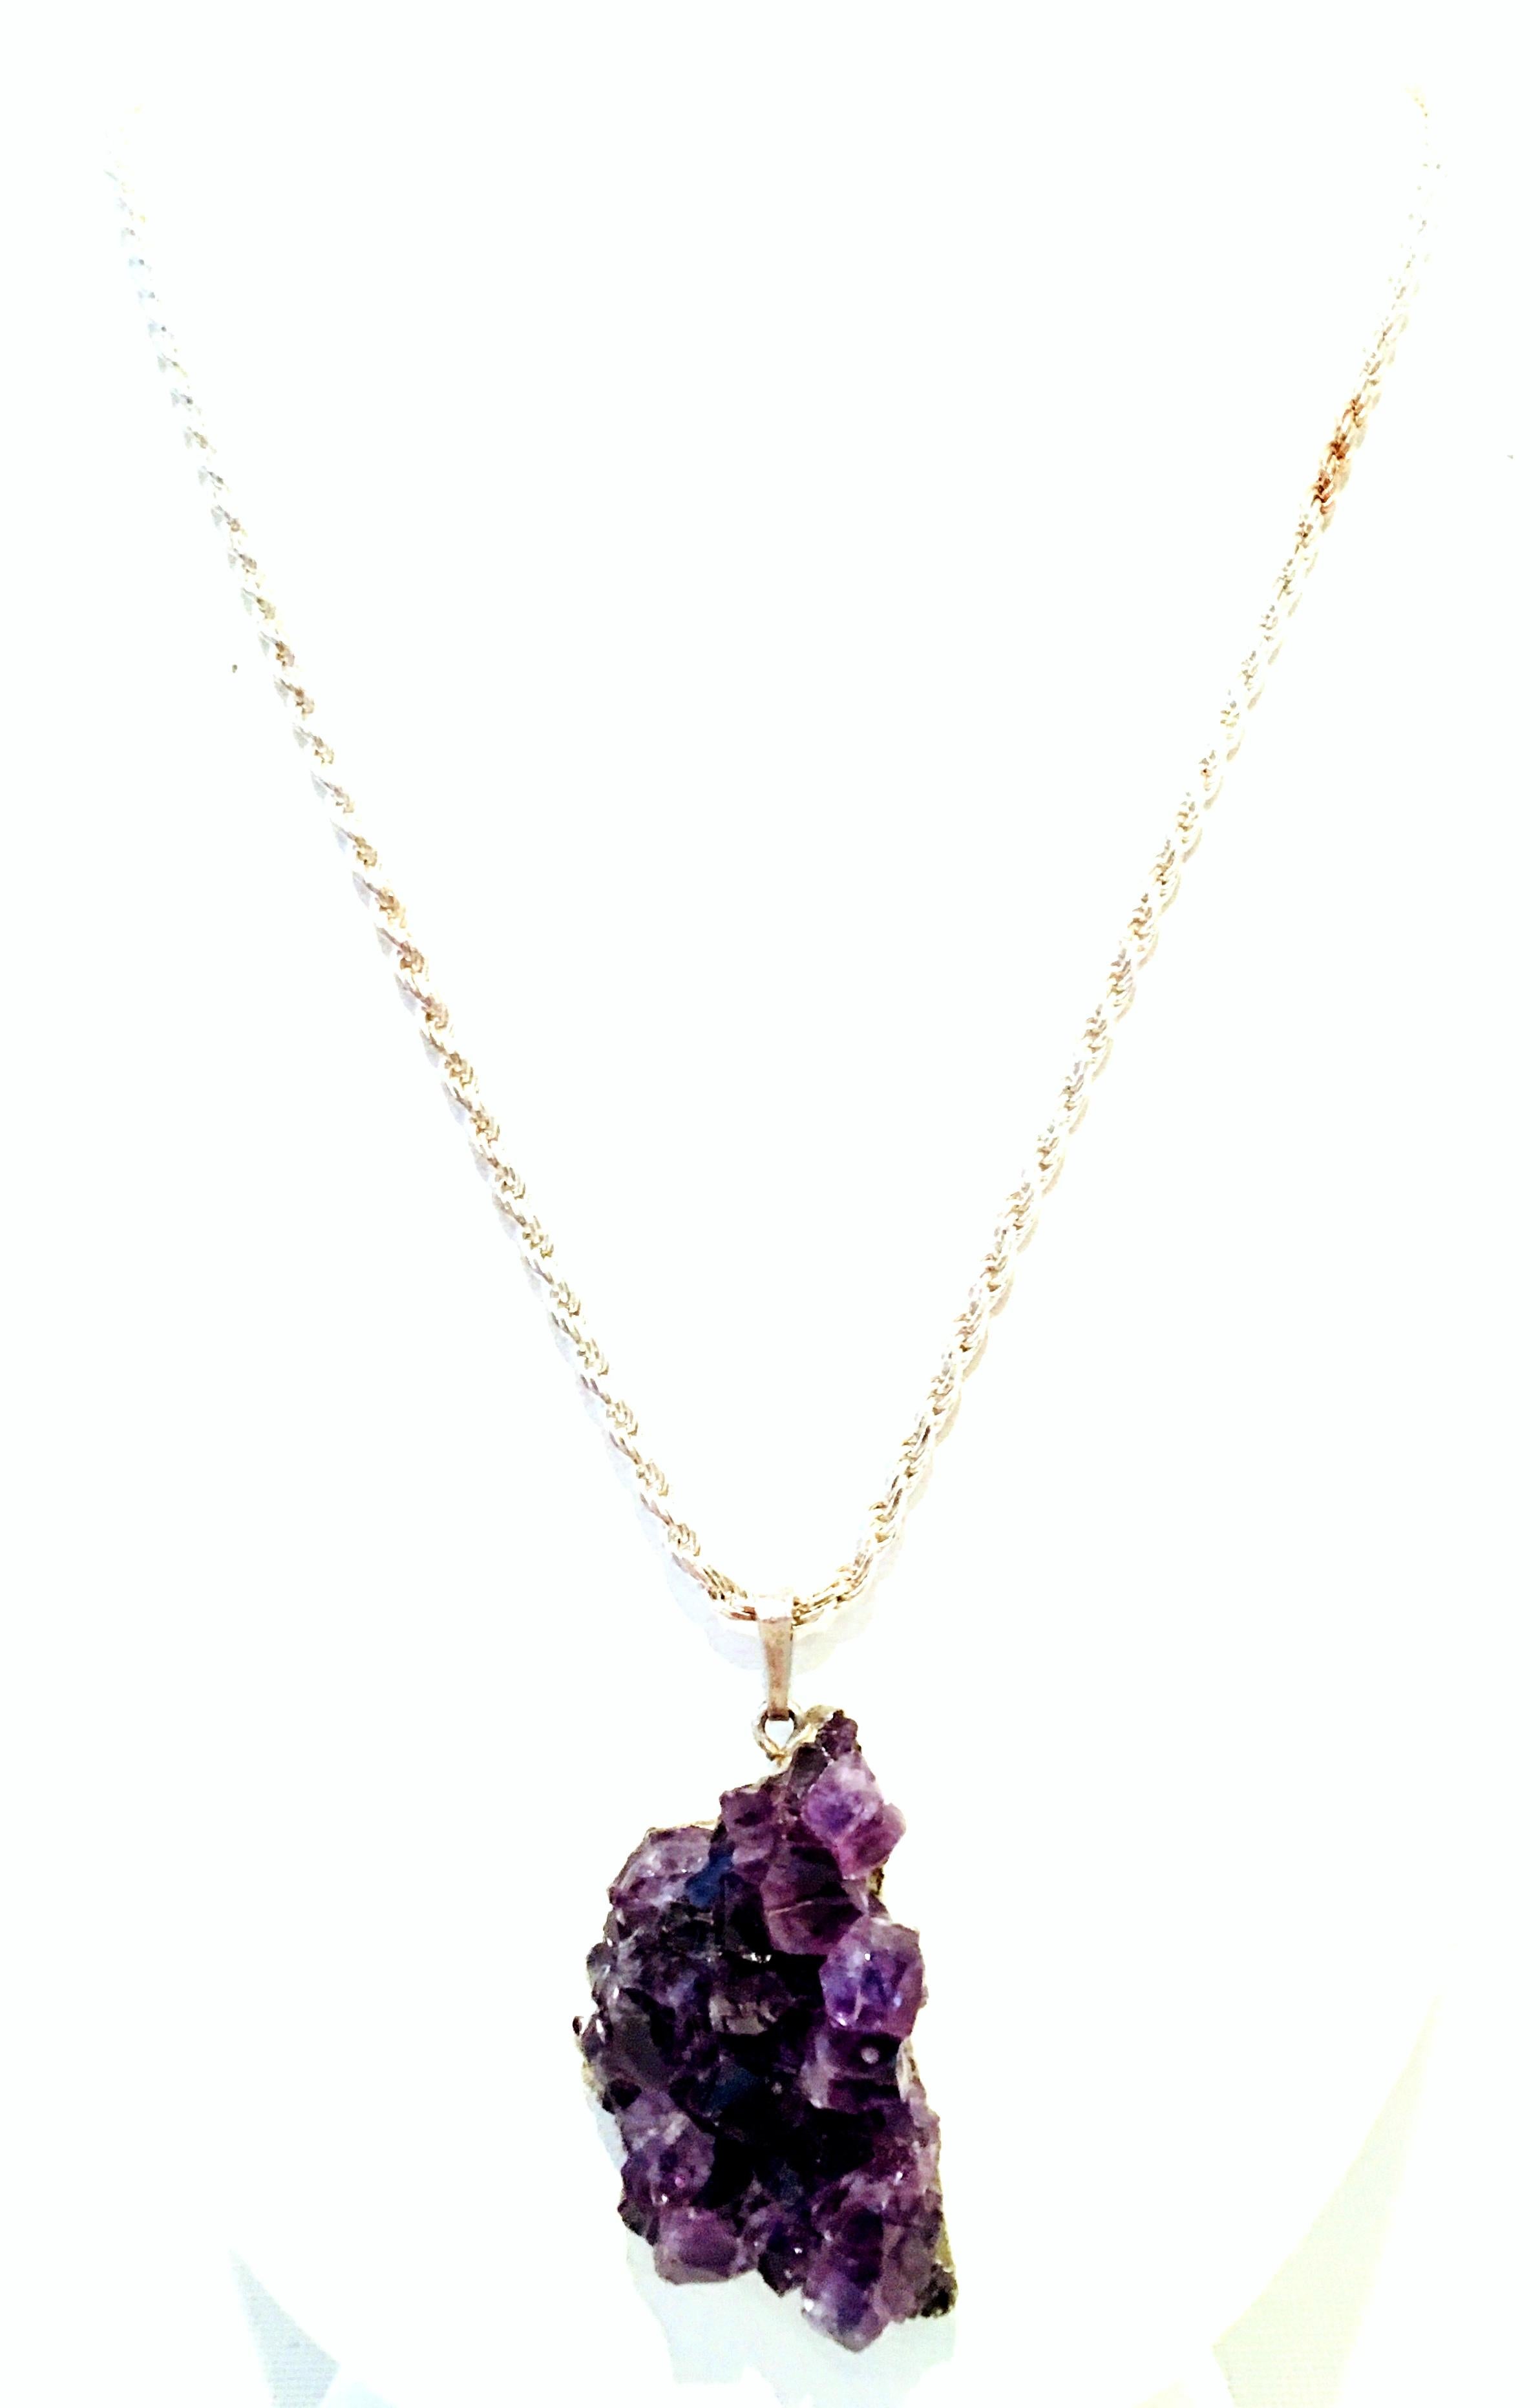 20th Century Italian 925 Sterling Silver & Natural Amethyst Geode Pendant Necklace. This signed Italian 925 Sterling Silver chain link necklace features a natural fine quality sterling silver set Amethyst Geode Crystal Pendant. The Geode itself